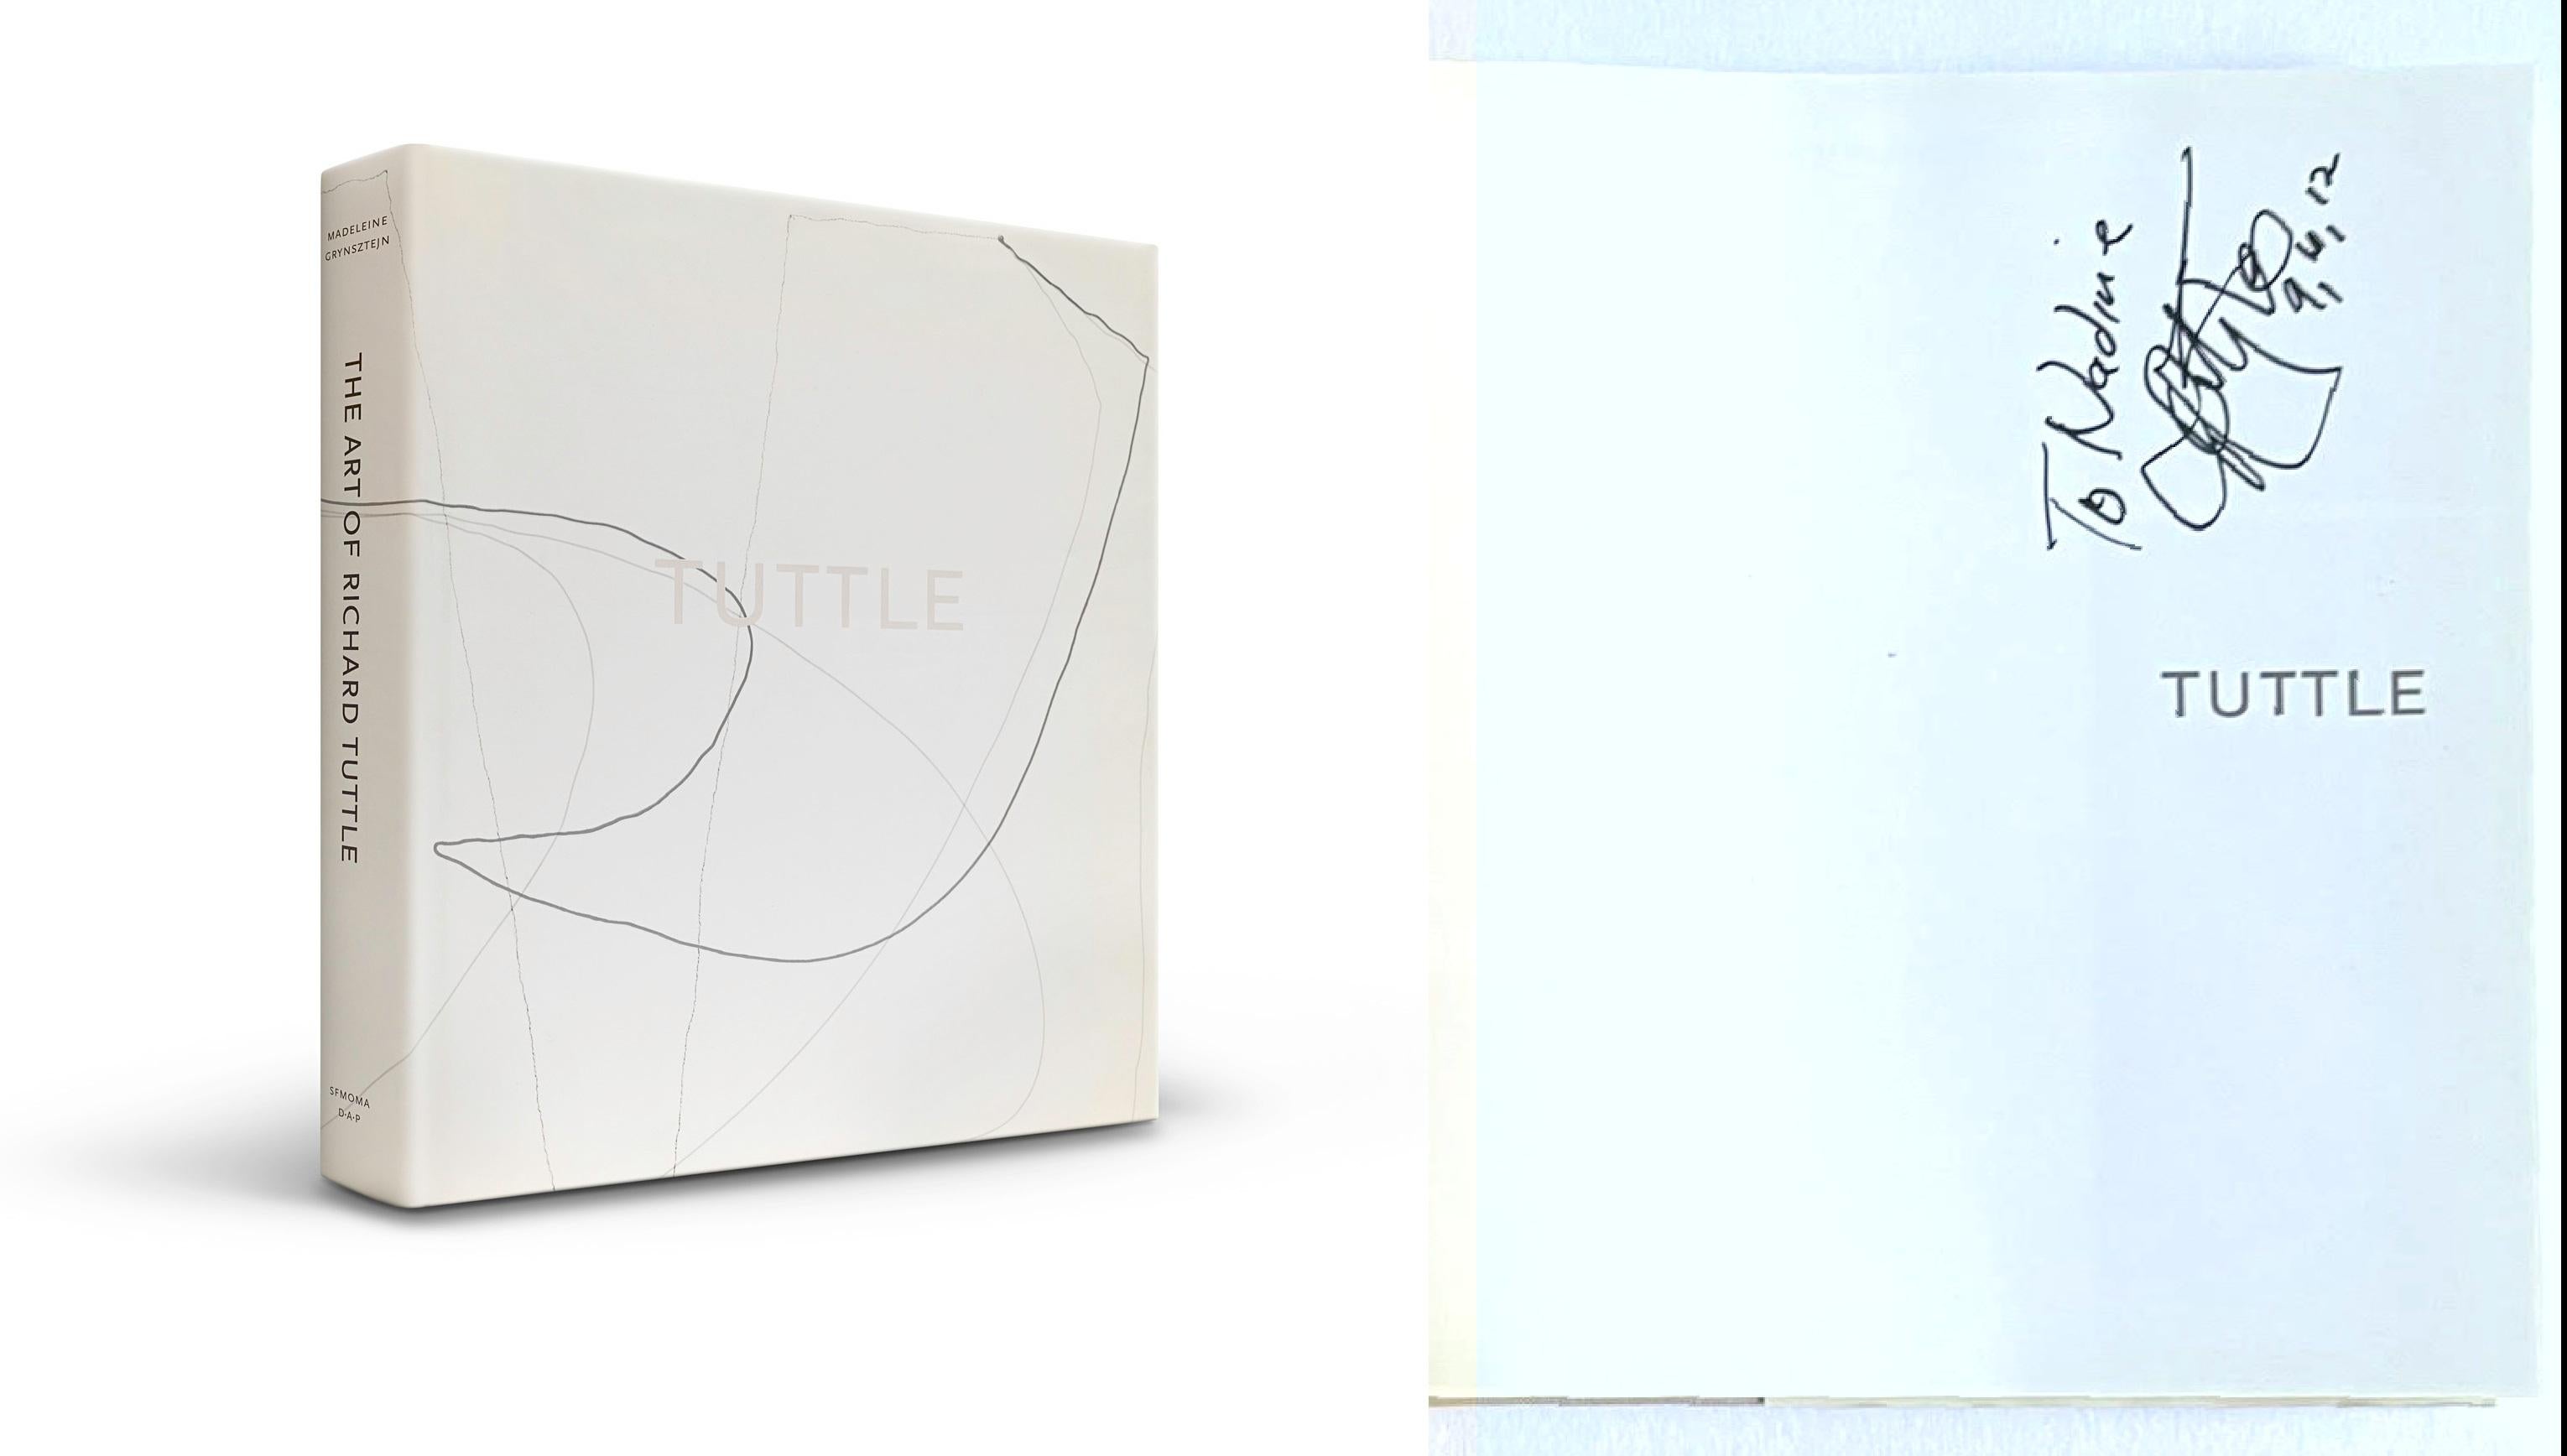 Richard Tuttle
The Art of Richard Tuttle (Hand signed, dated and inscribed by Richard Tuttle), 2005
Hardback monograph with dust jacket (Hand signed, dated and inscribed to Nadine by Richard Tuttle)
Hand signed, dated and inscribed to Nadine by